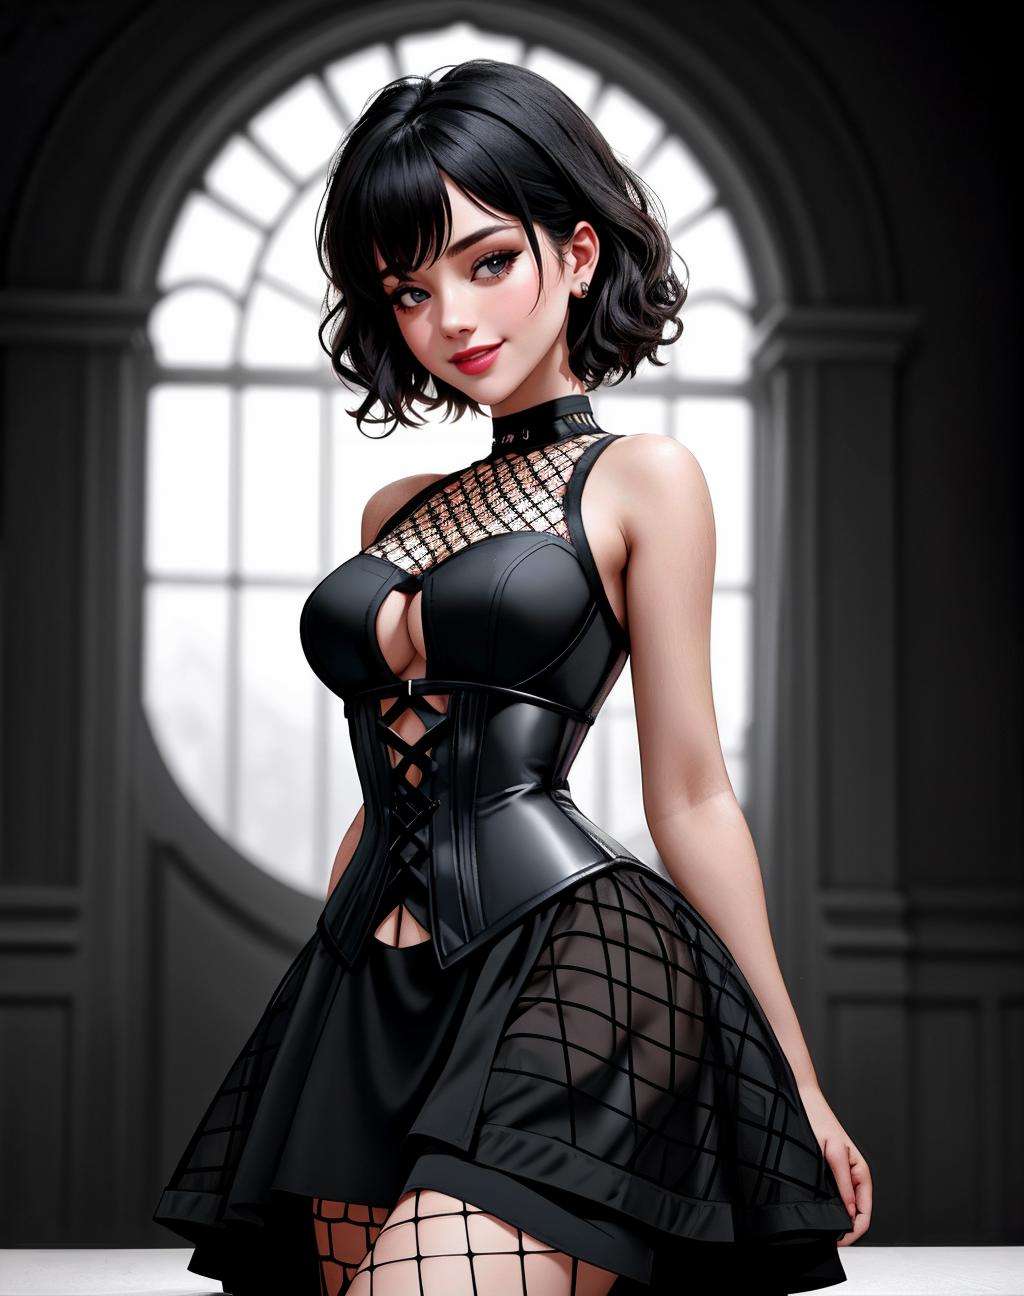 ((Masterpiece, best quality)),beautiful colors, sharp contrast,photography, detailed skin, realistic, photo-realistic, 8k, highly detailed, full length frame, High detail RAW color art, diffused soft lighting, shallow depth of field, sharp focus, hyperrealism, cinematic lighting,smiling,edgHO, fishnet_dress,((fishnets,cut out dress)),a woman in a black dress ,wearing edgHO,black background,corset,short skirt, <lora:edgHO:0.7>